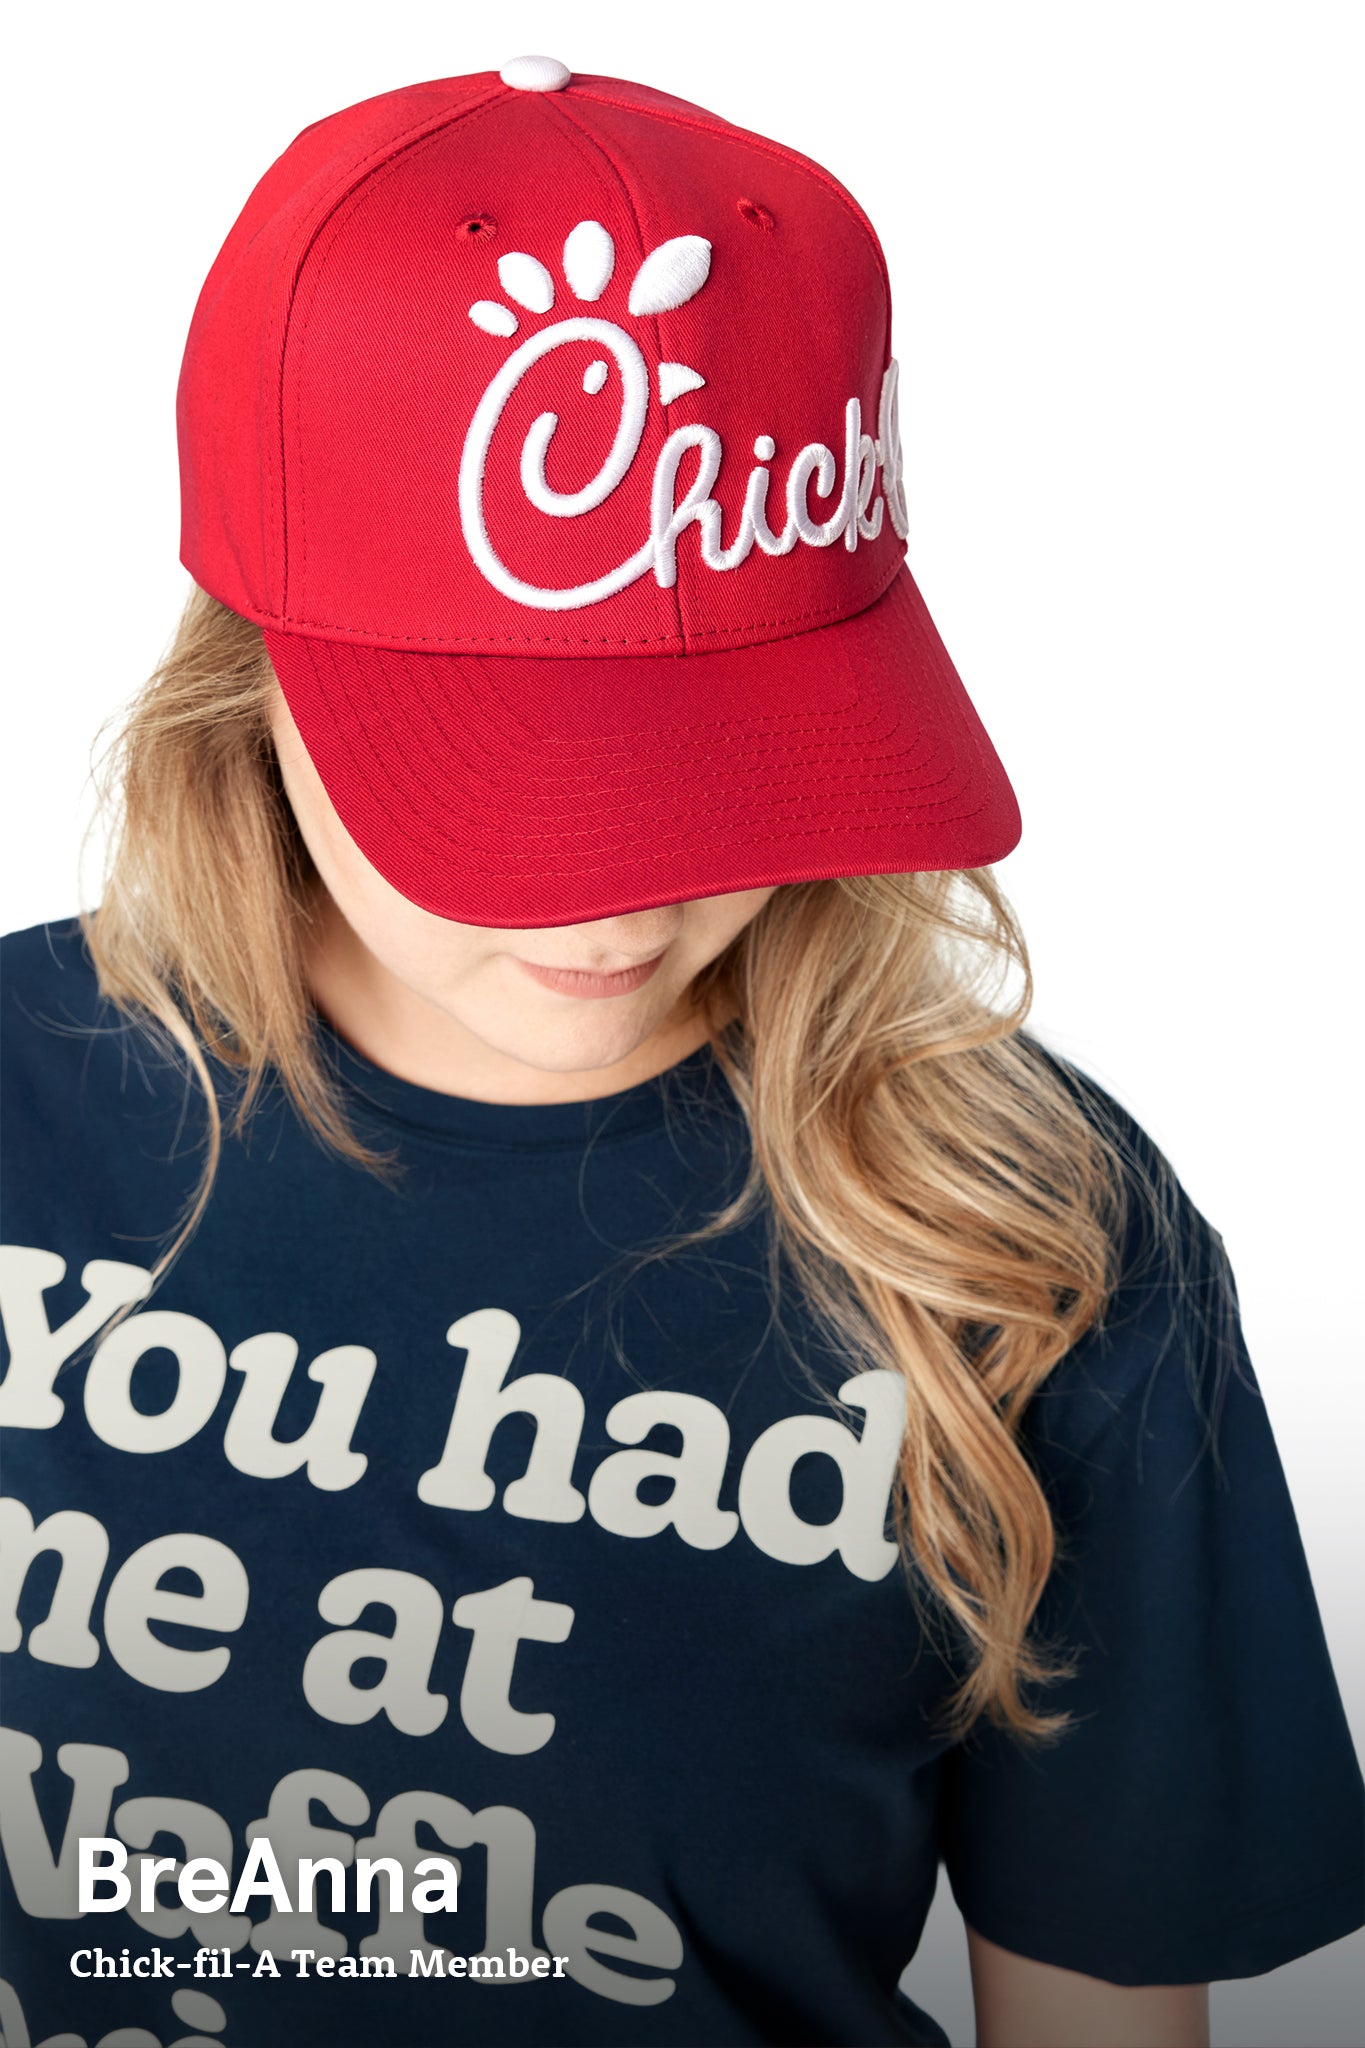 Woman wearing Classic Chick-fil-A Embroidered Hat looking down to show embroidery on hat